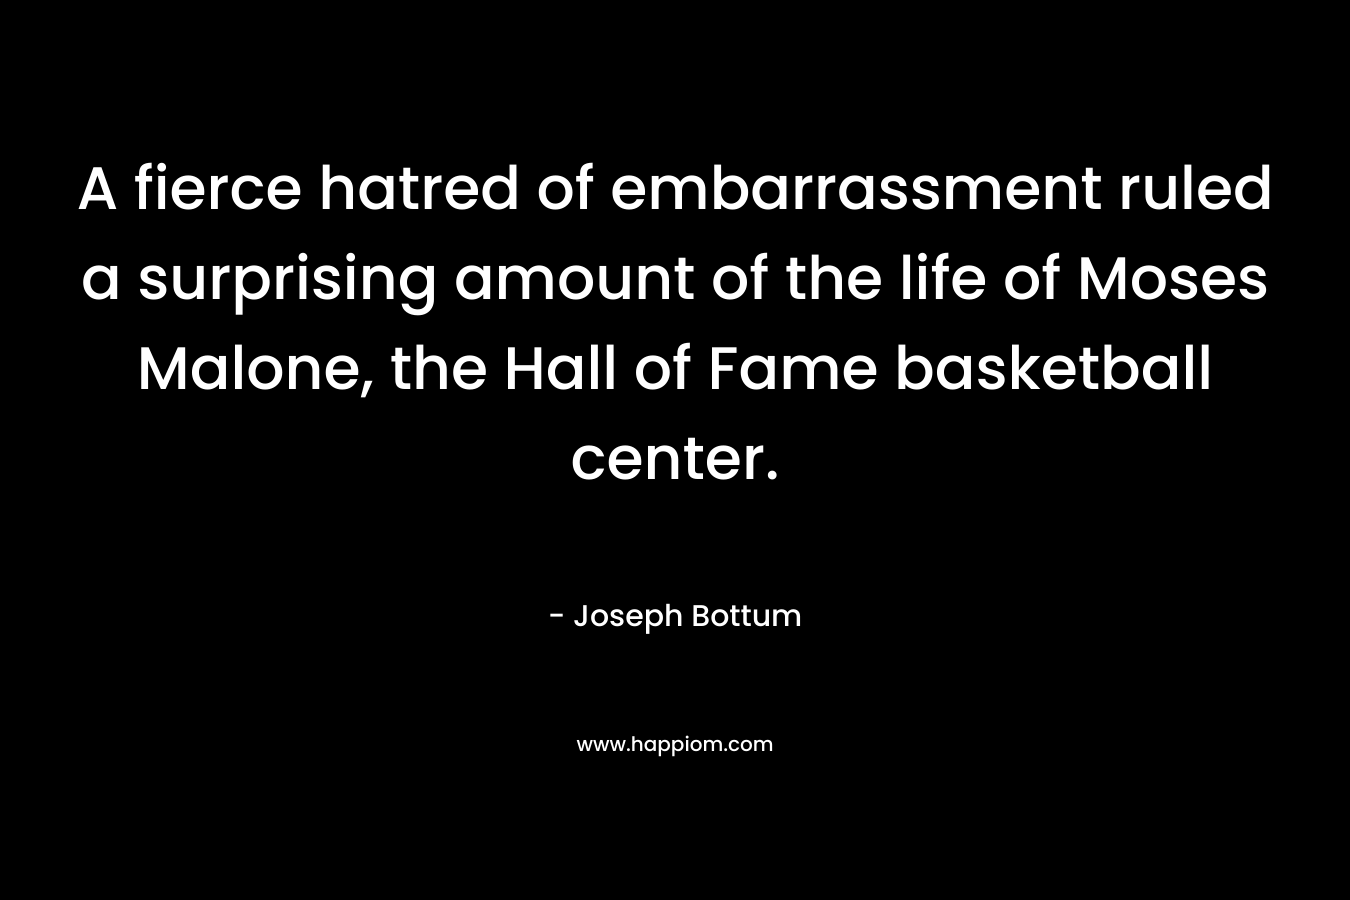 A fierce hatred of embarrassment ruled a surprising amount of the life of Moses Malone, the Hall of Fame basketball center. – Joseph Bottum